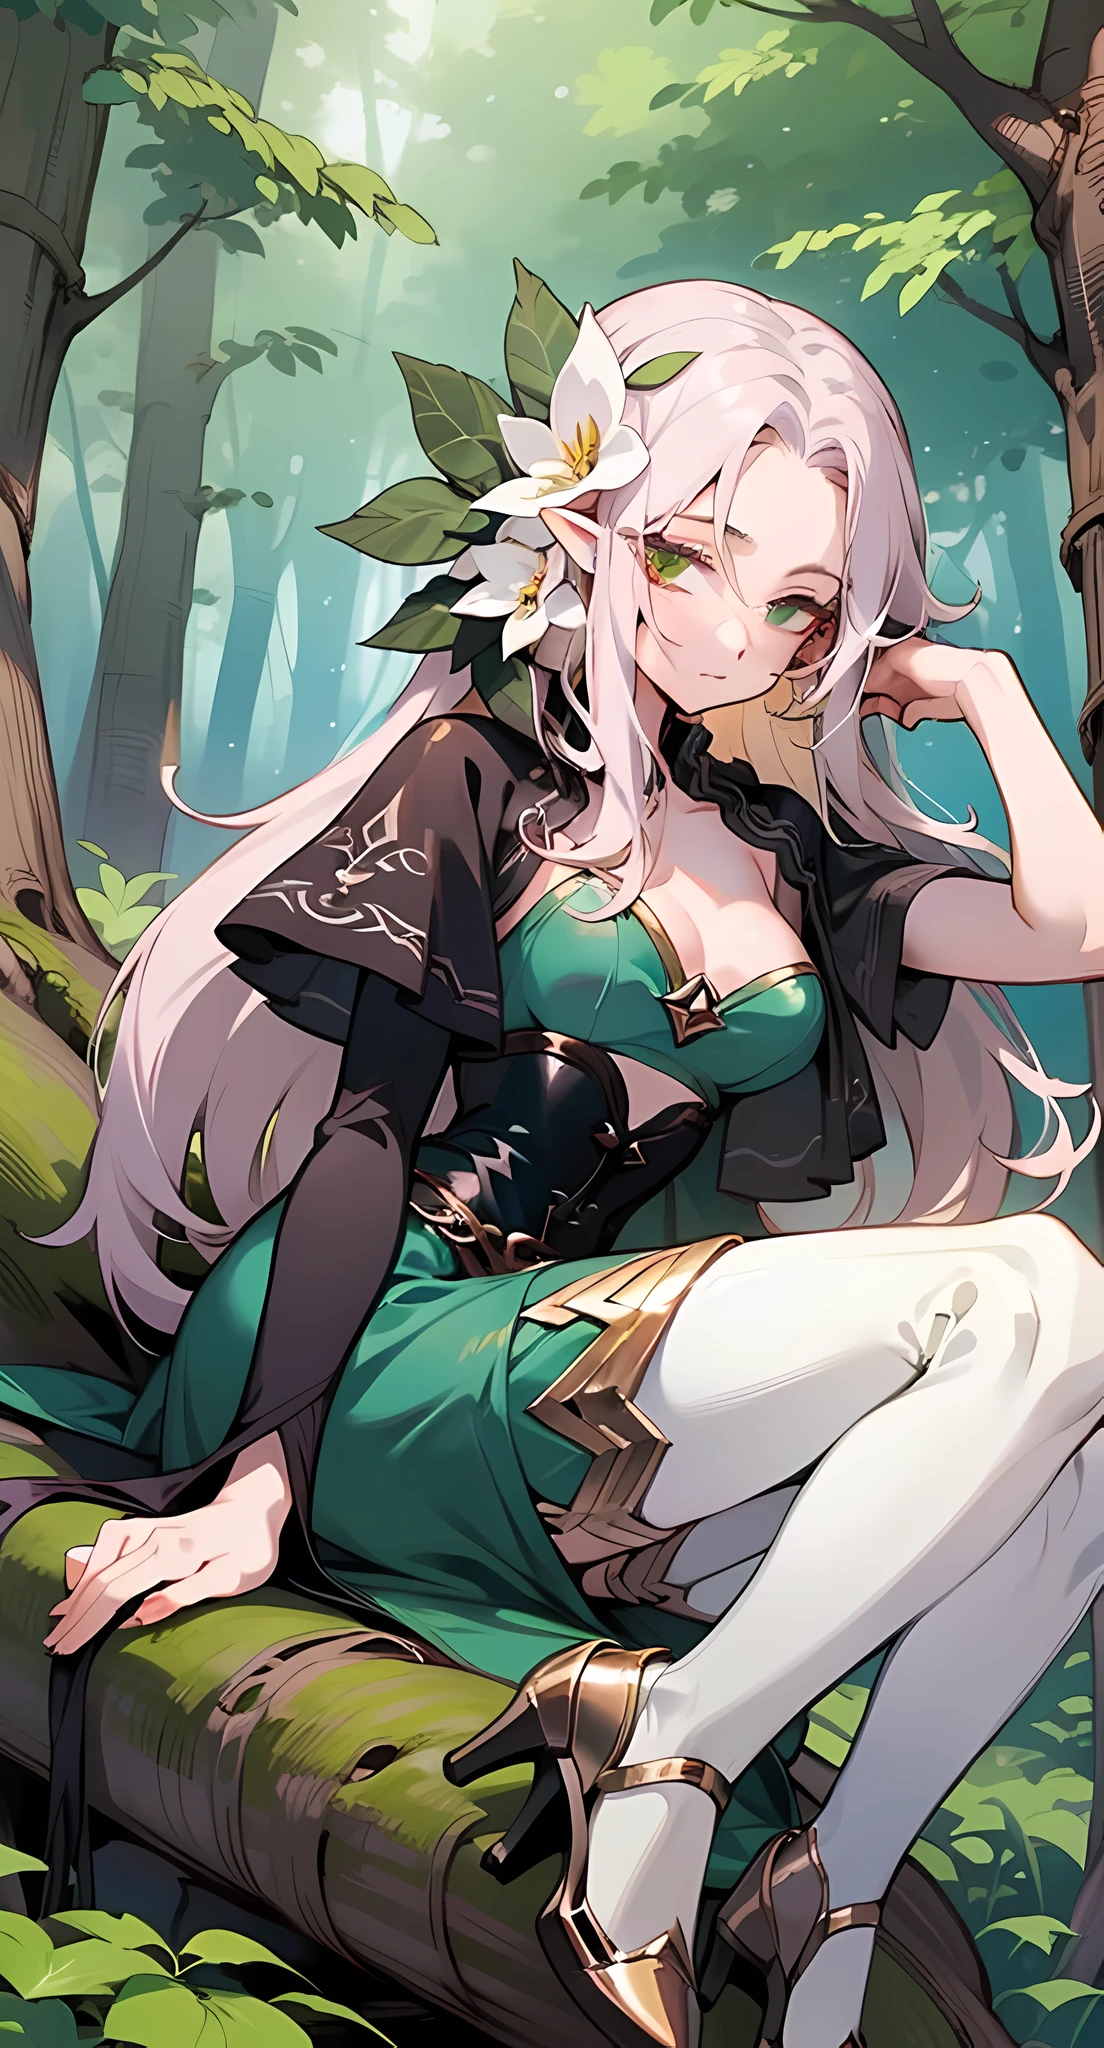 there is a woman sitting on a rock in a forest, anime girl cosplay, anime cosplay, cosplay photo, ornate cosplay, alluring elf princess knight, forest fairy, cosplay, very beautiful elven top model, forest soul, elf princess, elf girl, fantasy photoshoot, forest fae, goddess of the forest, fey queen of the summer forest